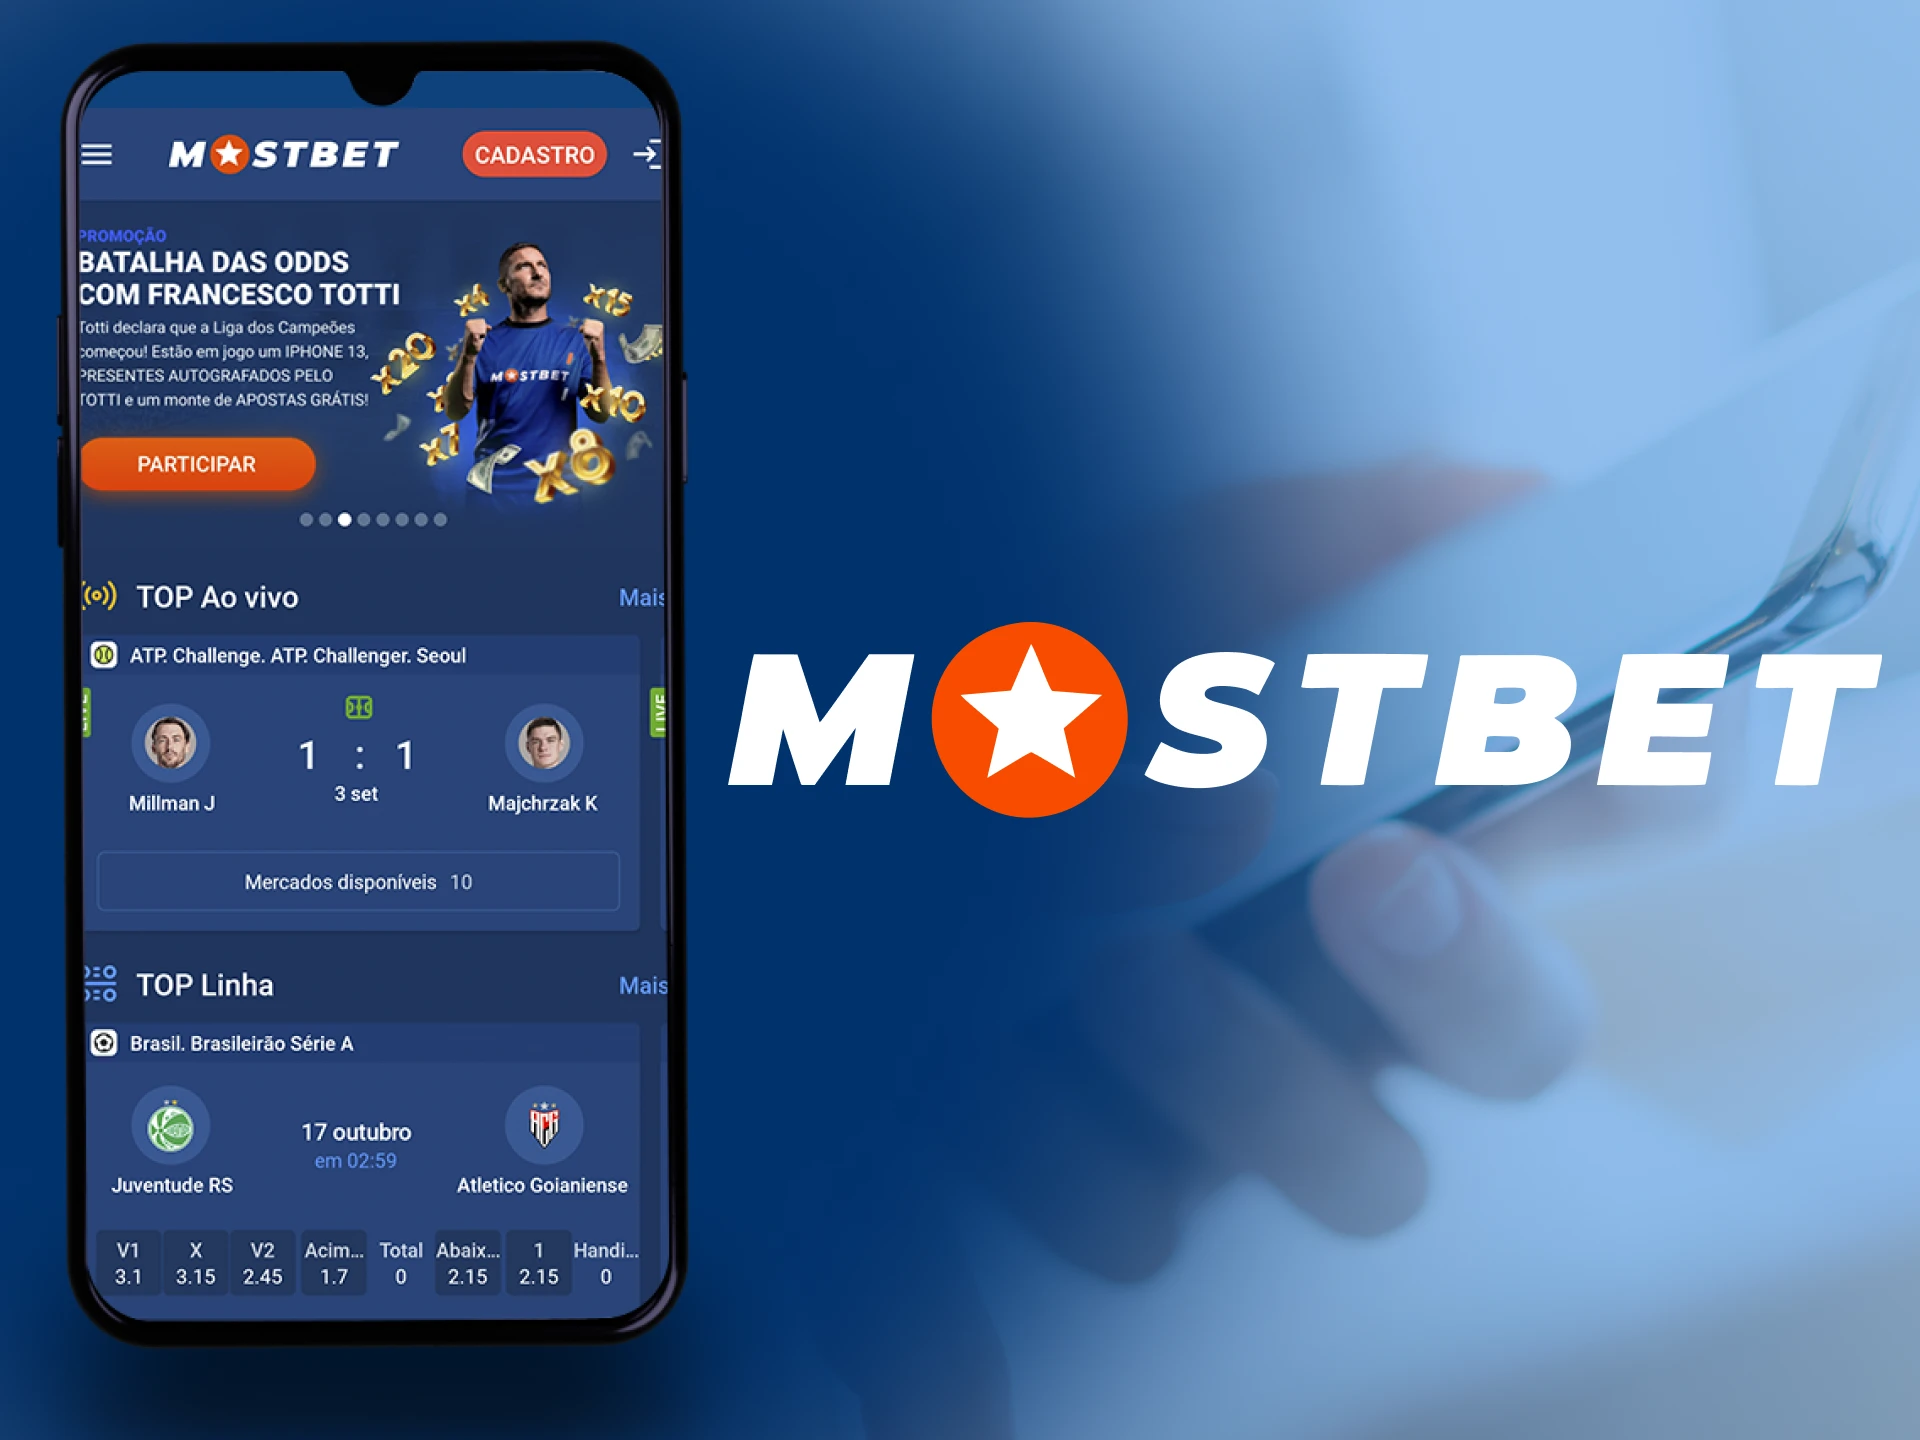 Get Better Registering at Mostbet is a simple and user-friendly process. With comprehensive guides like 